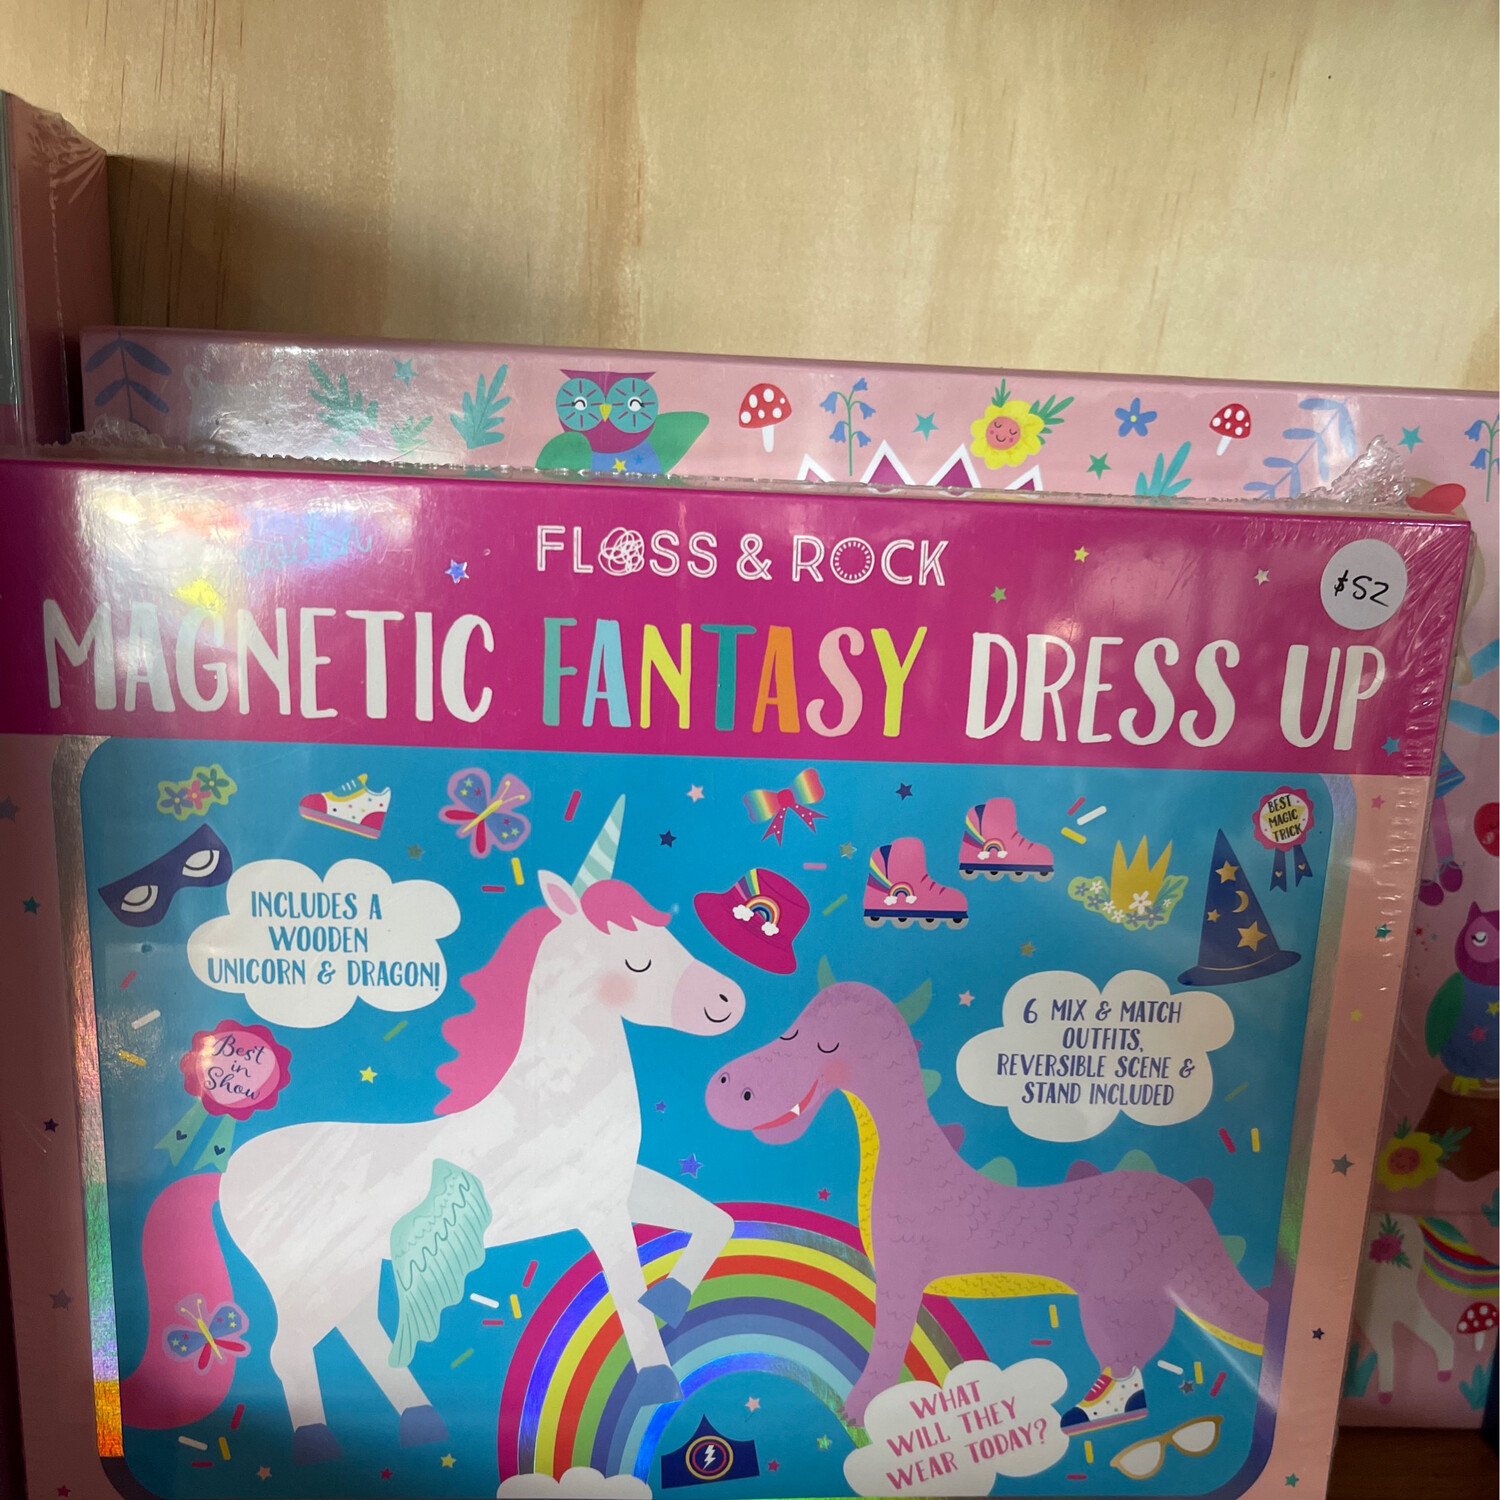 Magnetic Fantasy Dress Up by Floss & Rock